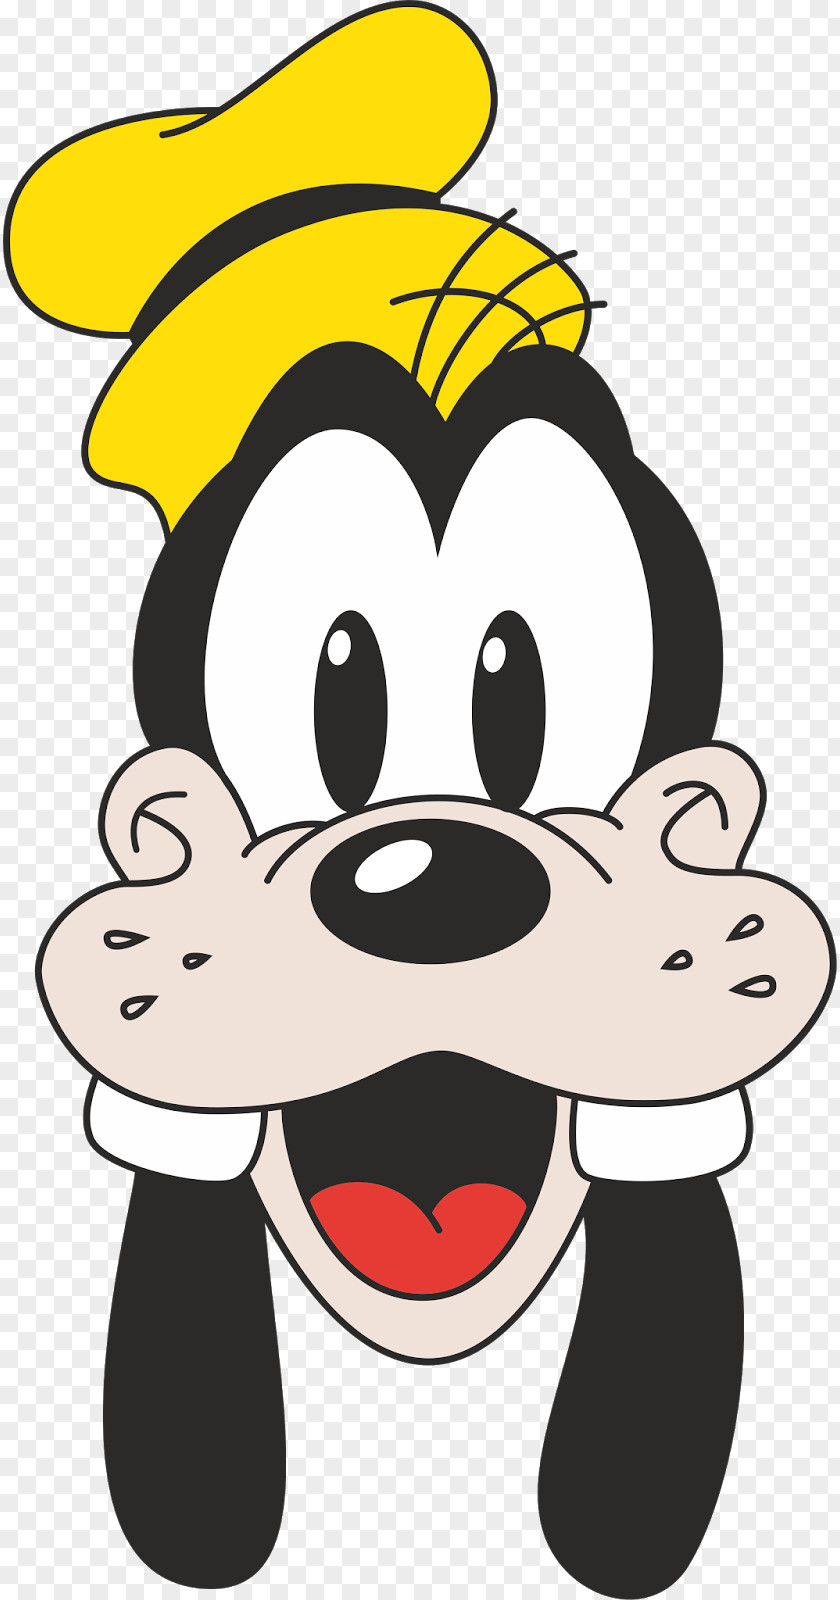 Cdr Goofy Minnie Mouse Mickey Donald Duck Pluto PNG